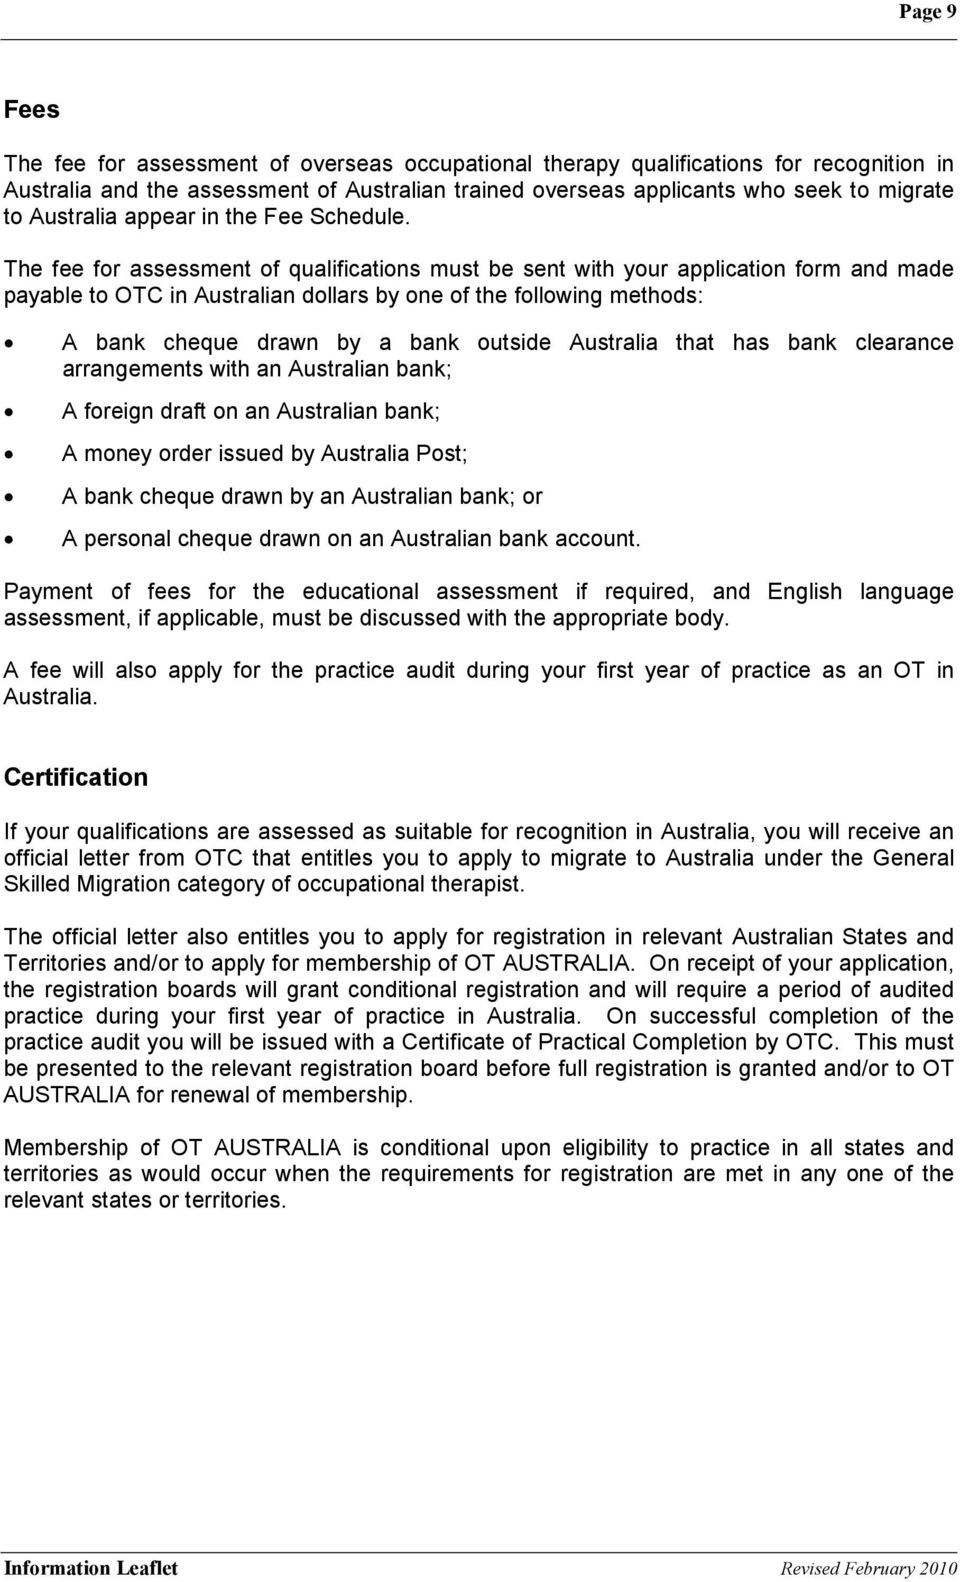 The fee for assessment of qualifications must be sent with your application form and made payable to OTC in Australian dollars by one of the following methods: A bank cheque drawn by a bank outside